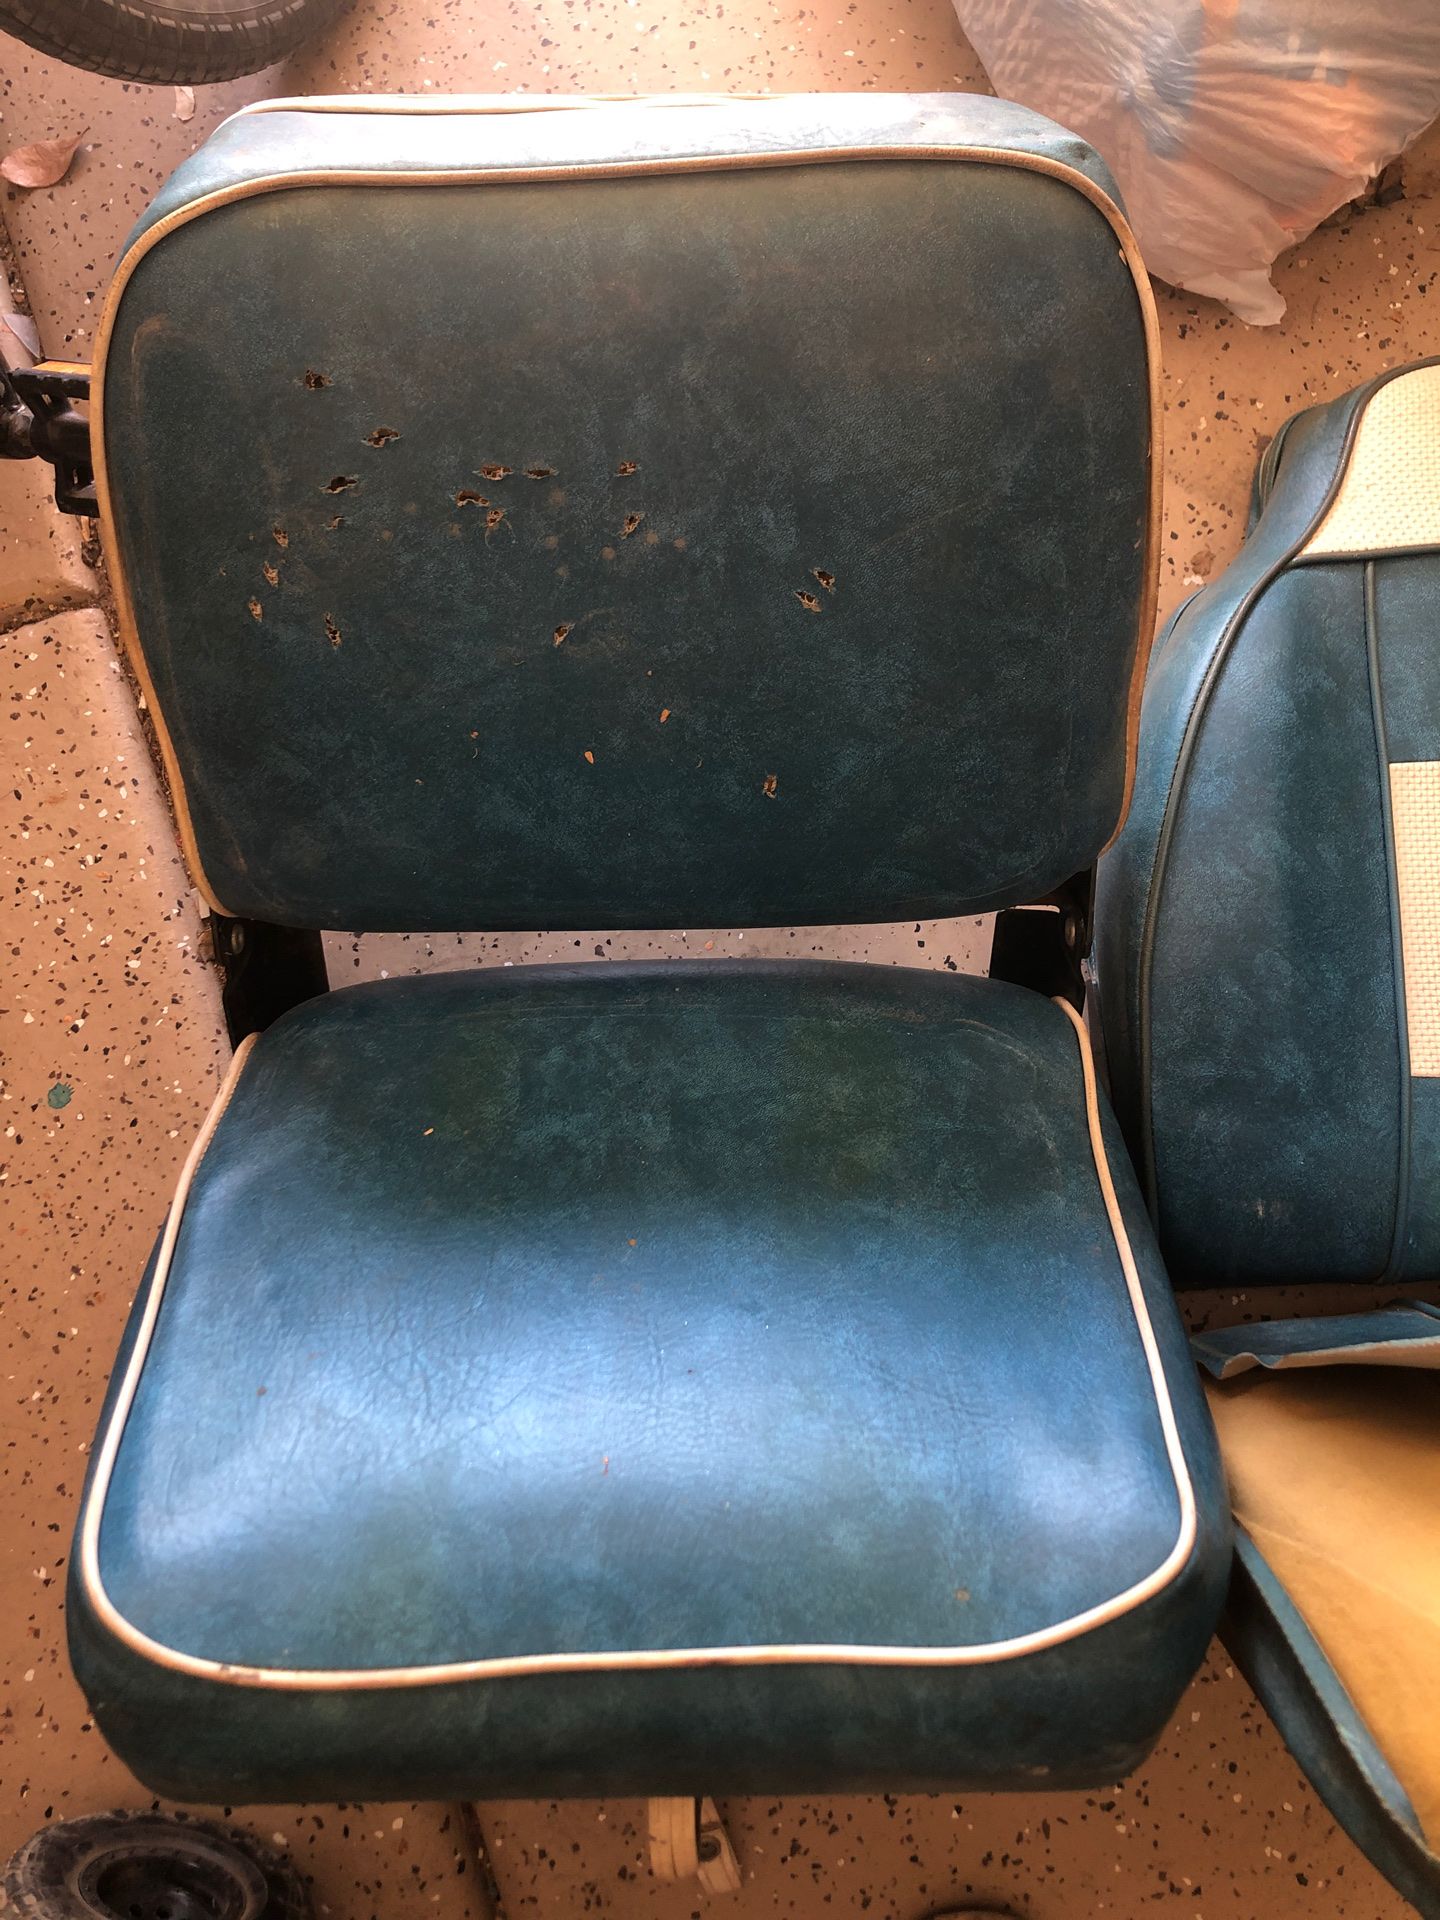 Boat chairs - Free